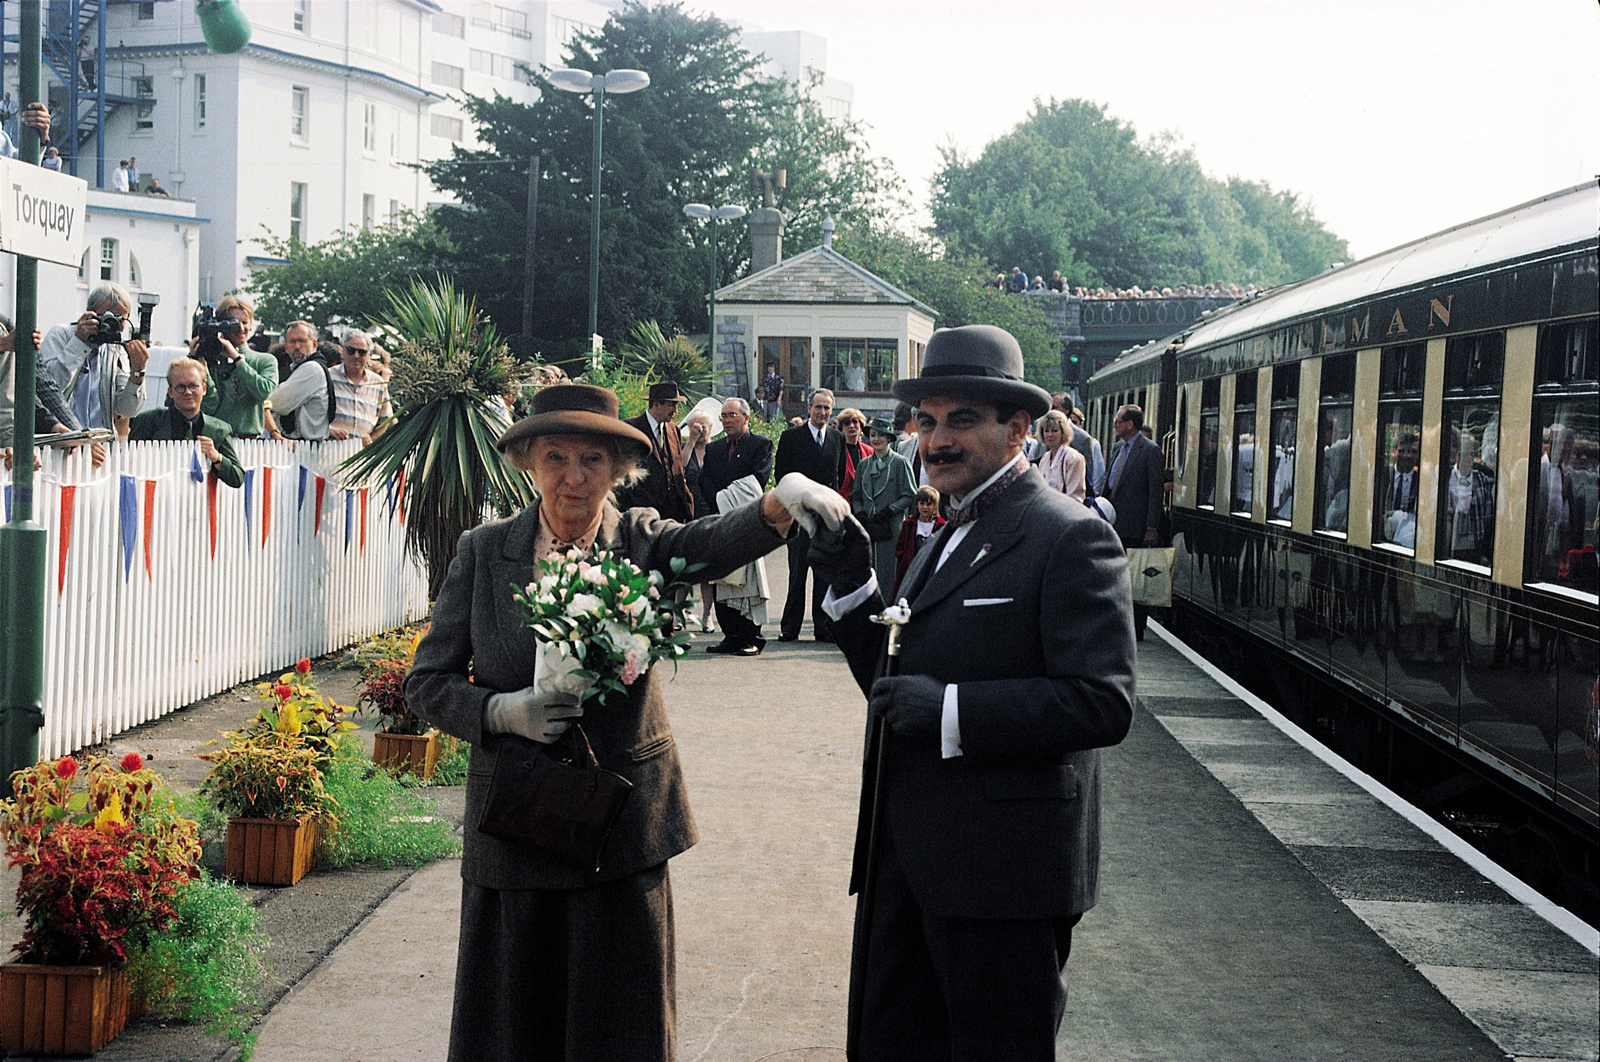 A picture of Joan Hickson and David Suchet as Agatha Christie's  Miss Marple and Hercule Poirot at Torquay station